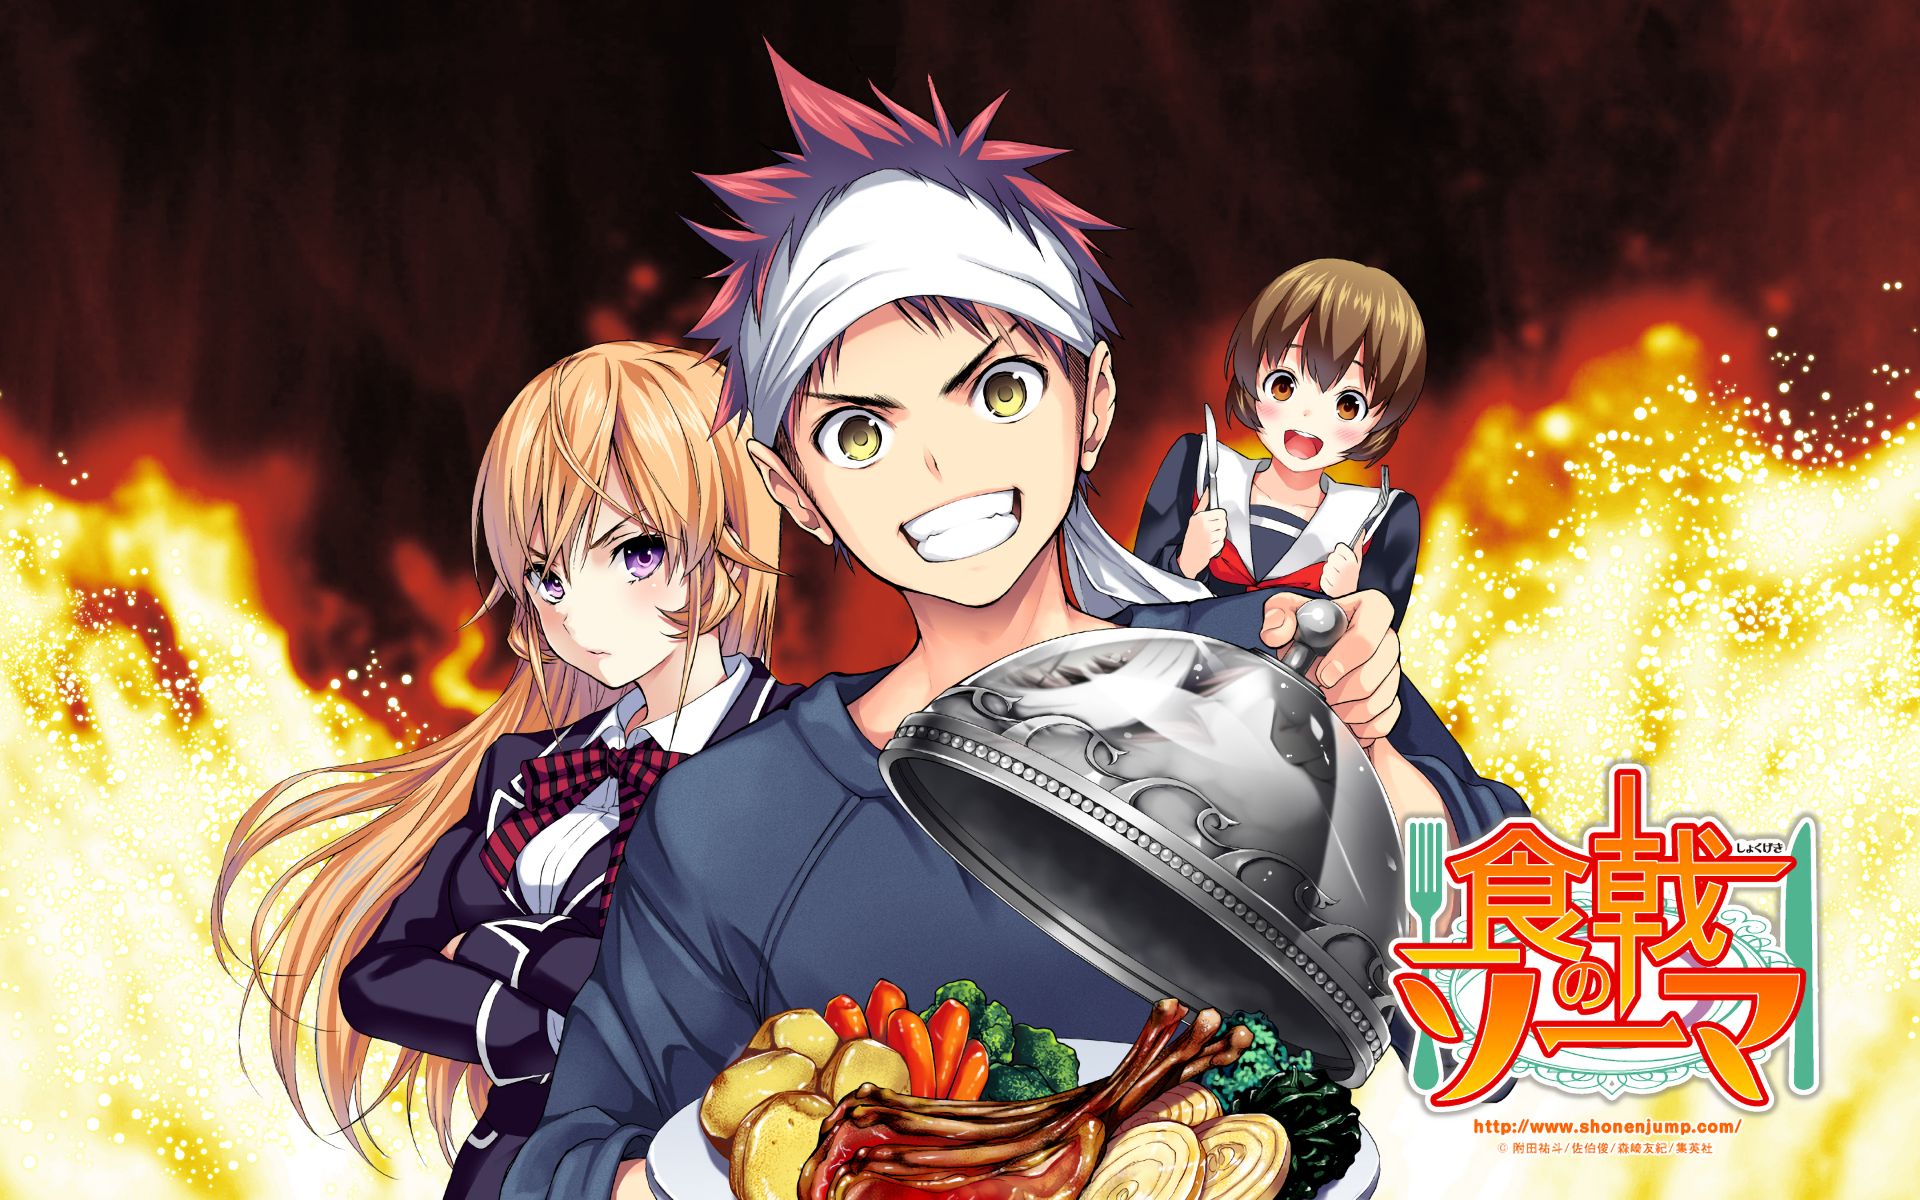 Anime is Campfire cooking in another world : r/lostpause